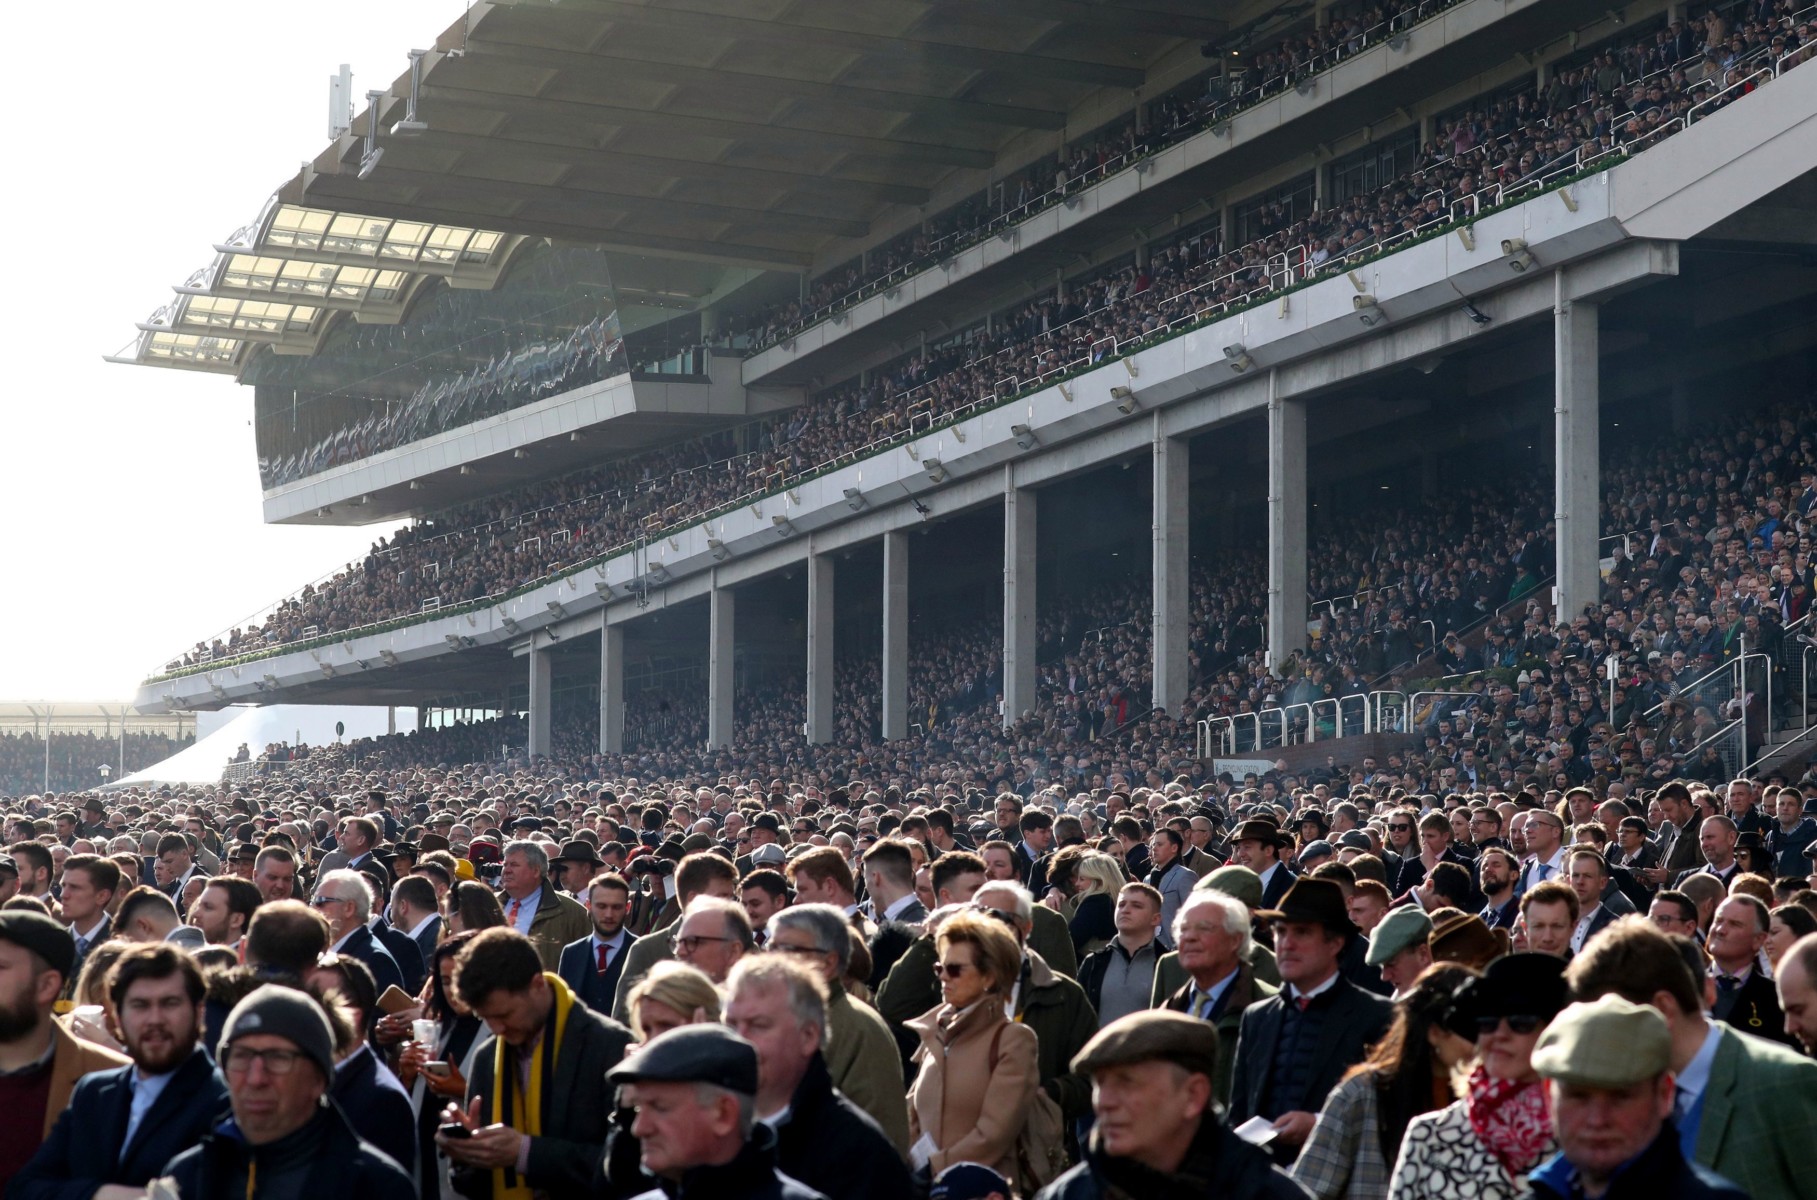 Thousands of people attended Cheltenham Festival in March